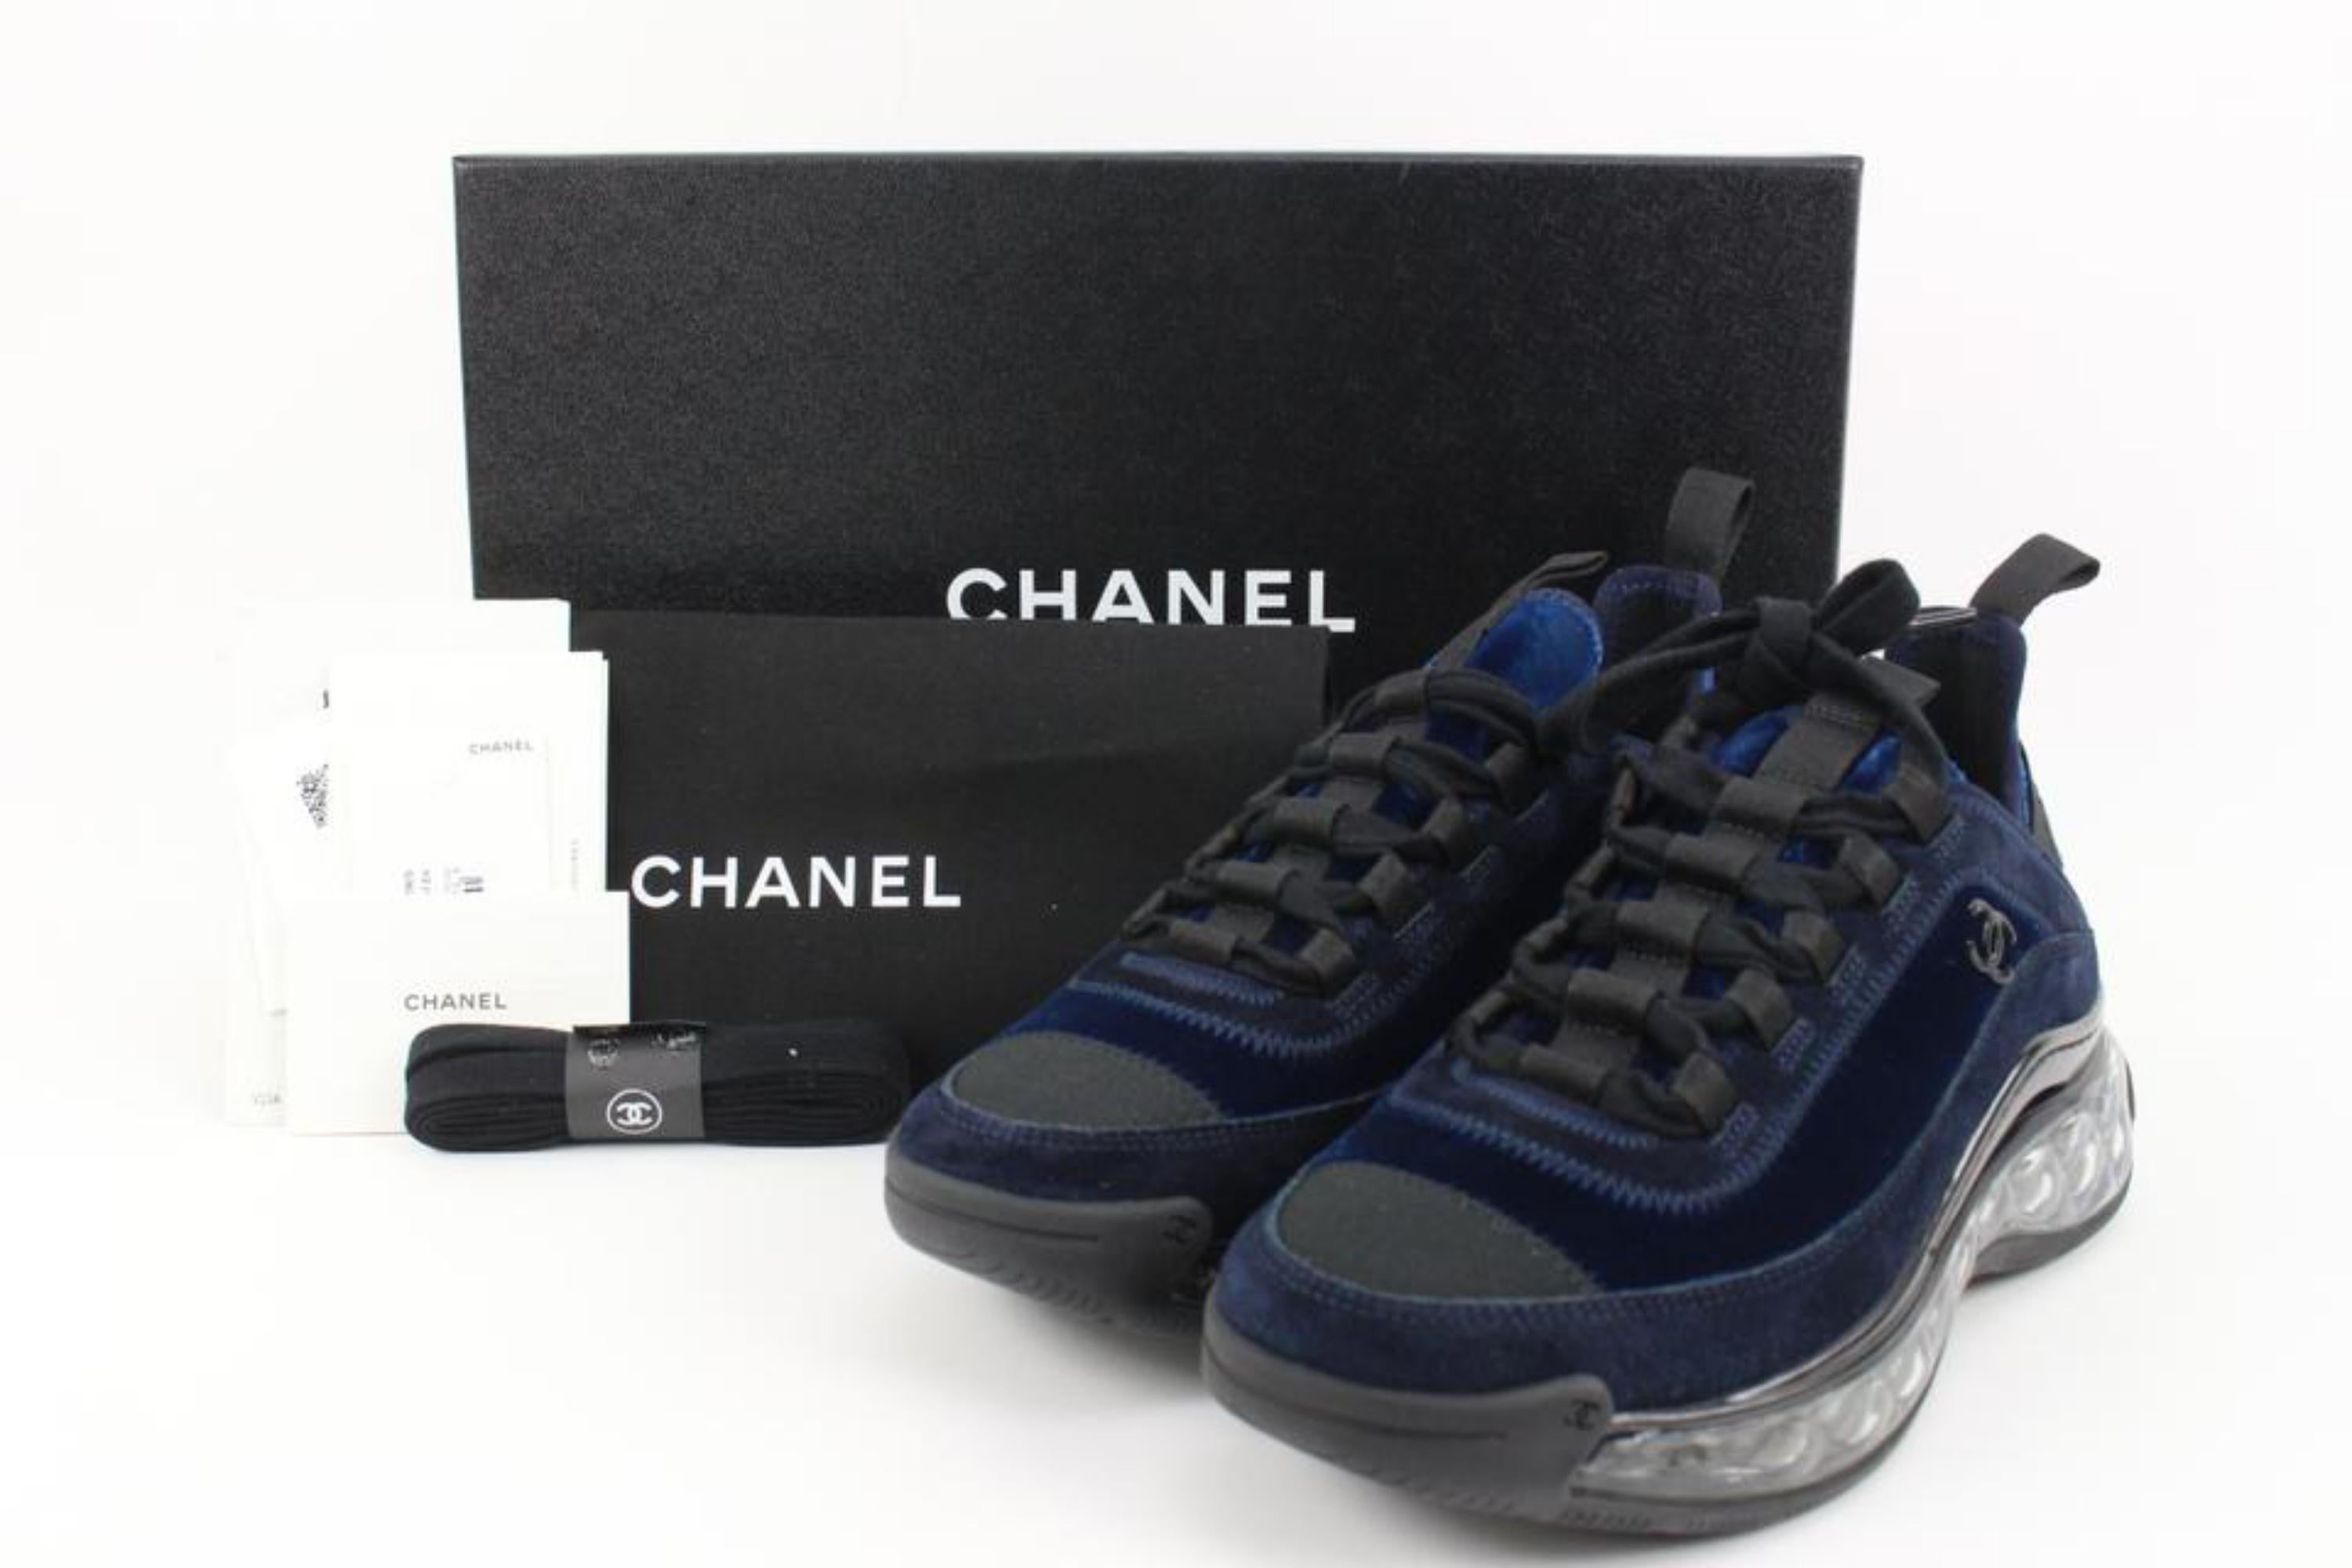 Chanel Women's 20A Blue Velvet Quilted Clear Platform Bubble Sneakers 44c217s
Date Code/Serial Number: L G36299
Made In: Italy
Measurements: Length:  10.75